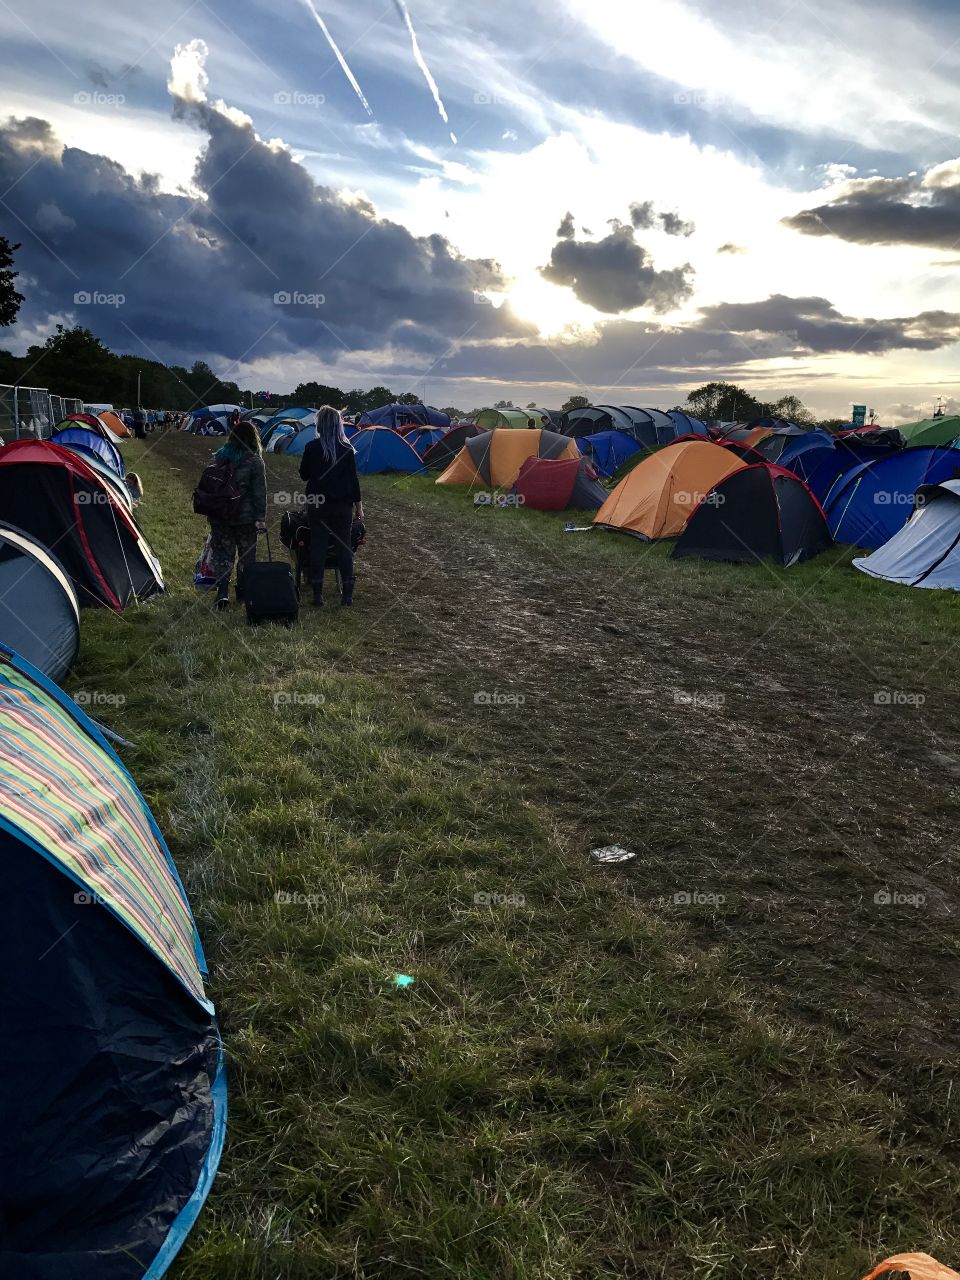 Two girls arrive at a festival and walk through a muddy field surrounded by a mass of other tents with their suitcases as the sun begins to set 